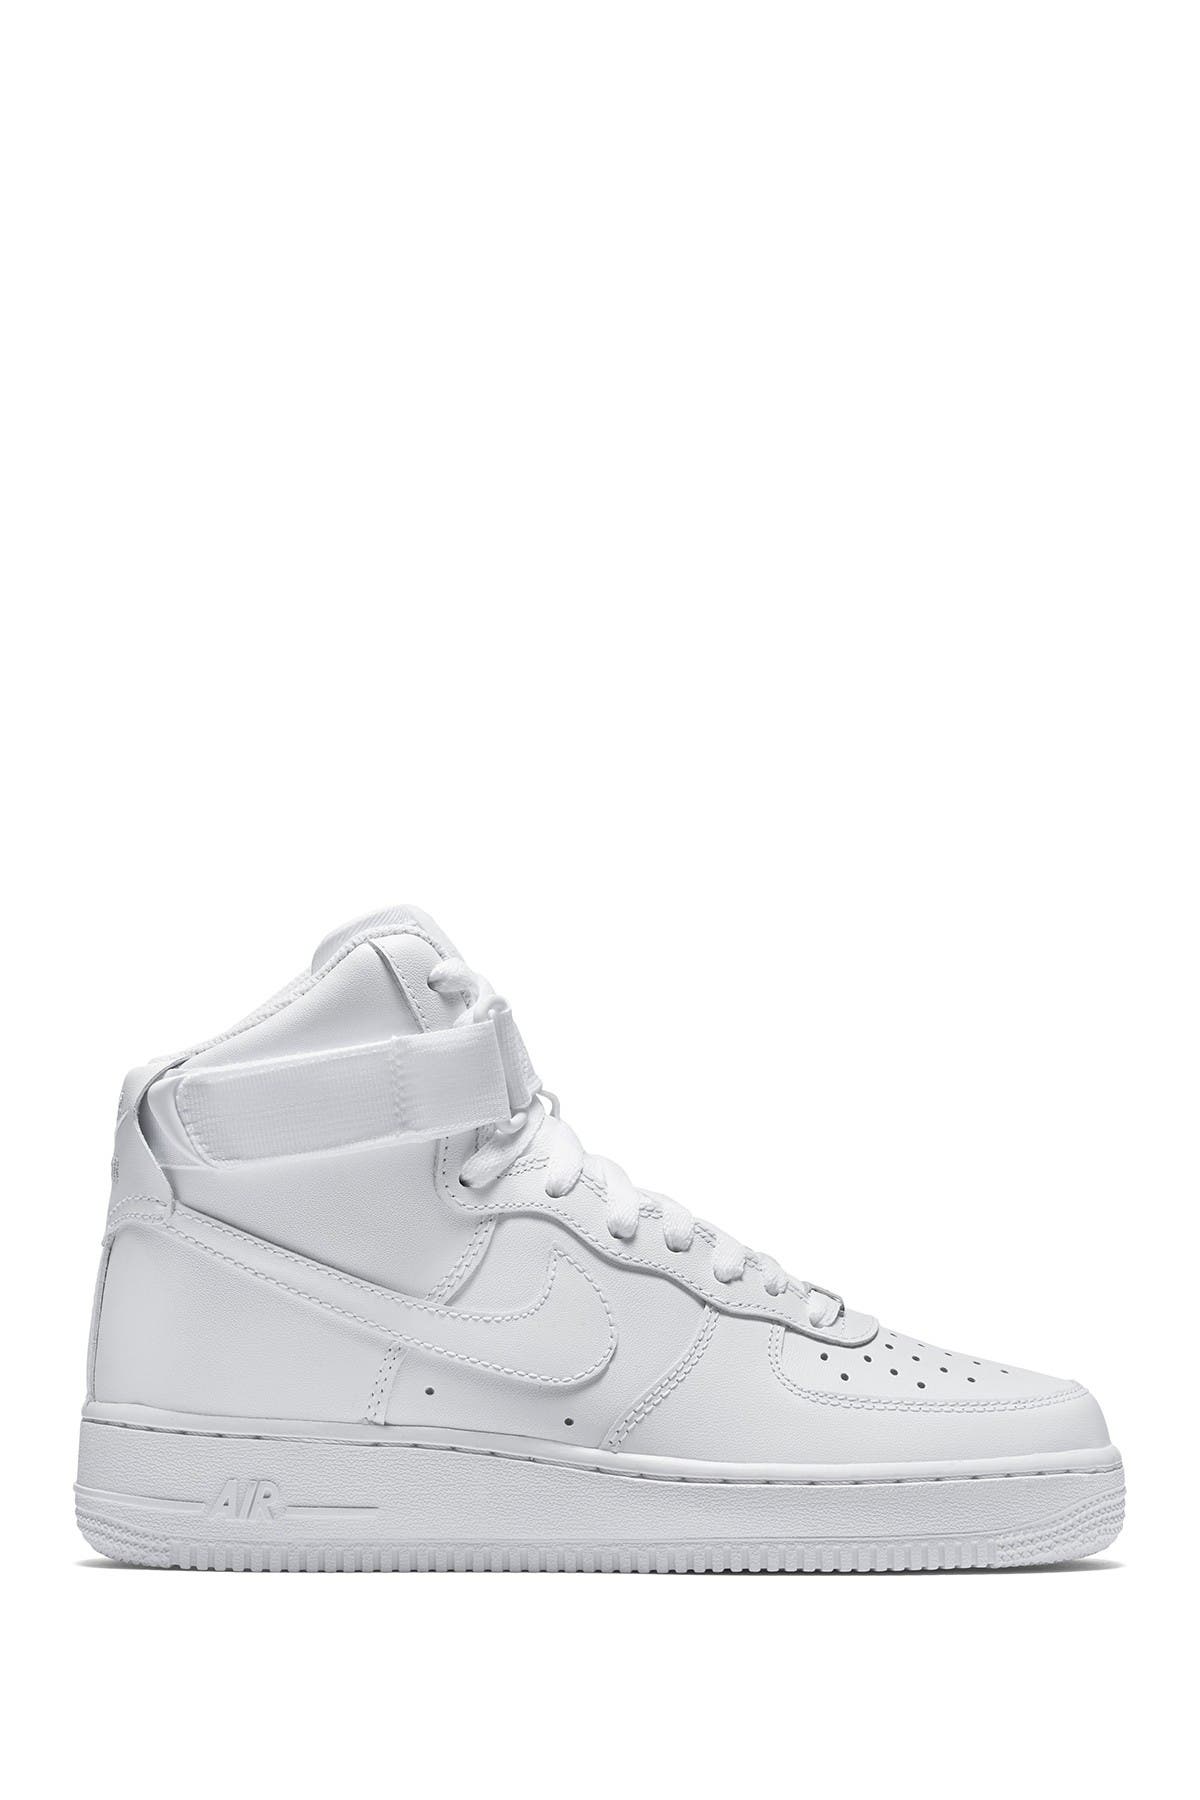 nike air force 1 womens white nordstrom